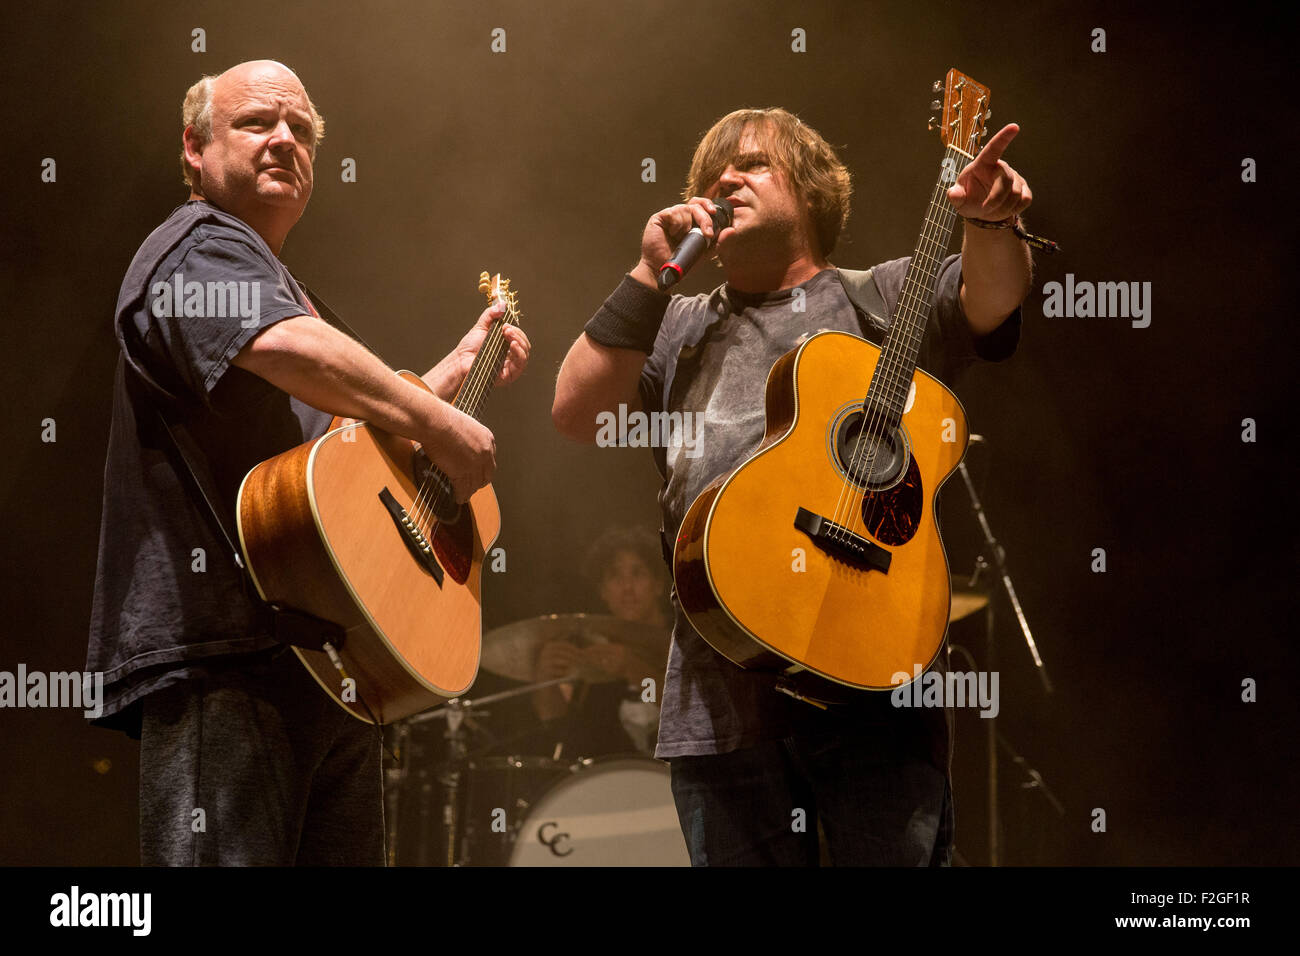 Chicago, Illinois, USA. 13th Sep, 2015. KYLE GASS (L) and JACK BLACK of Tenacious D perform live during Riot Fest at Douglas Park in Chicago, Illinois © Daniel DeSlover/ZUMA Wire/Alamy Live News Stock Photo